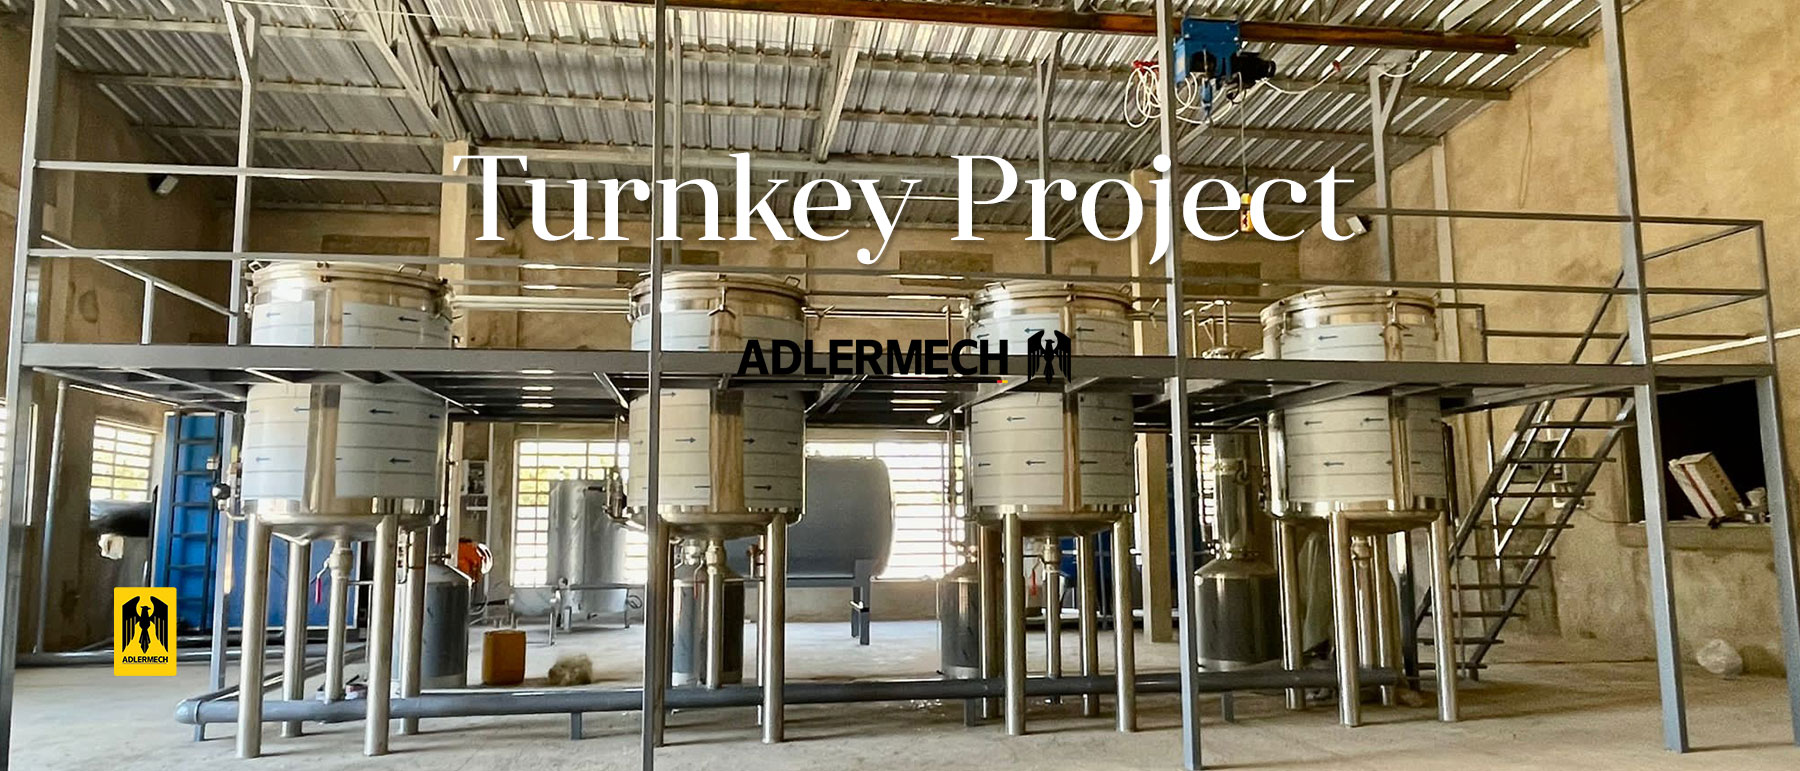 Turnkey Project Delivery & Commissioning in Burkina Faso